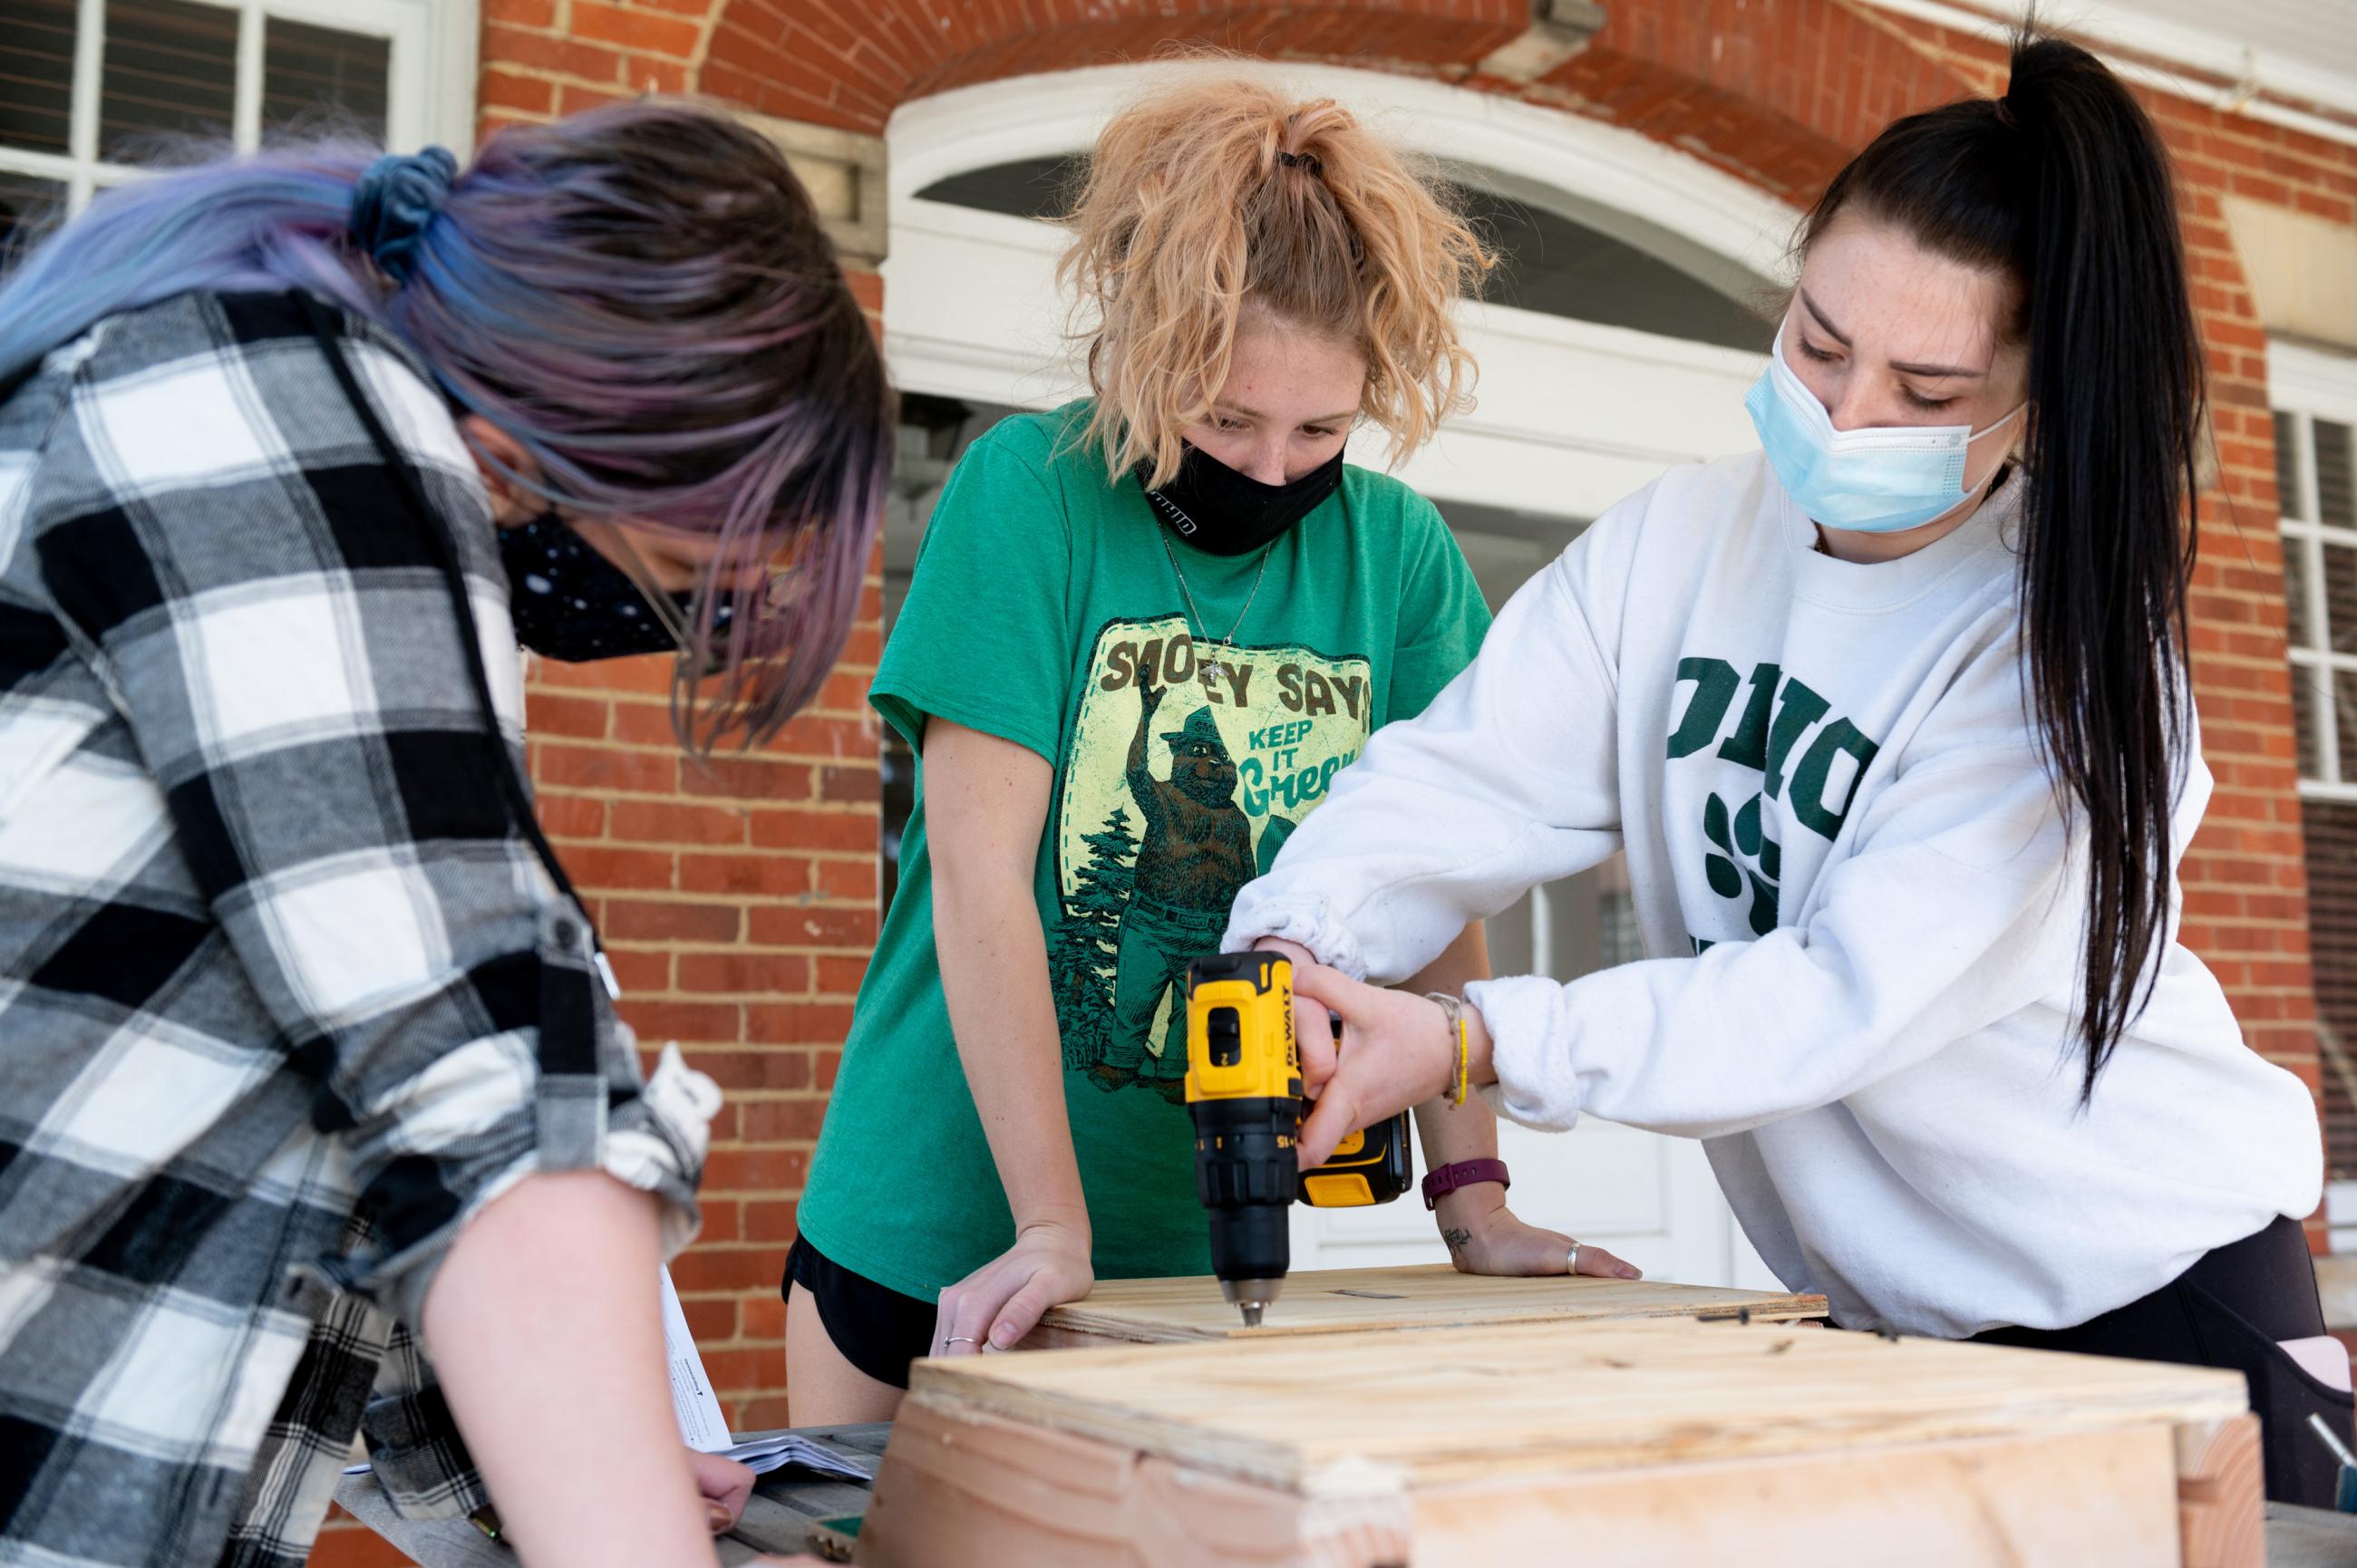 Three woman use a power drill to build a bat house.